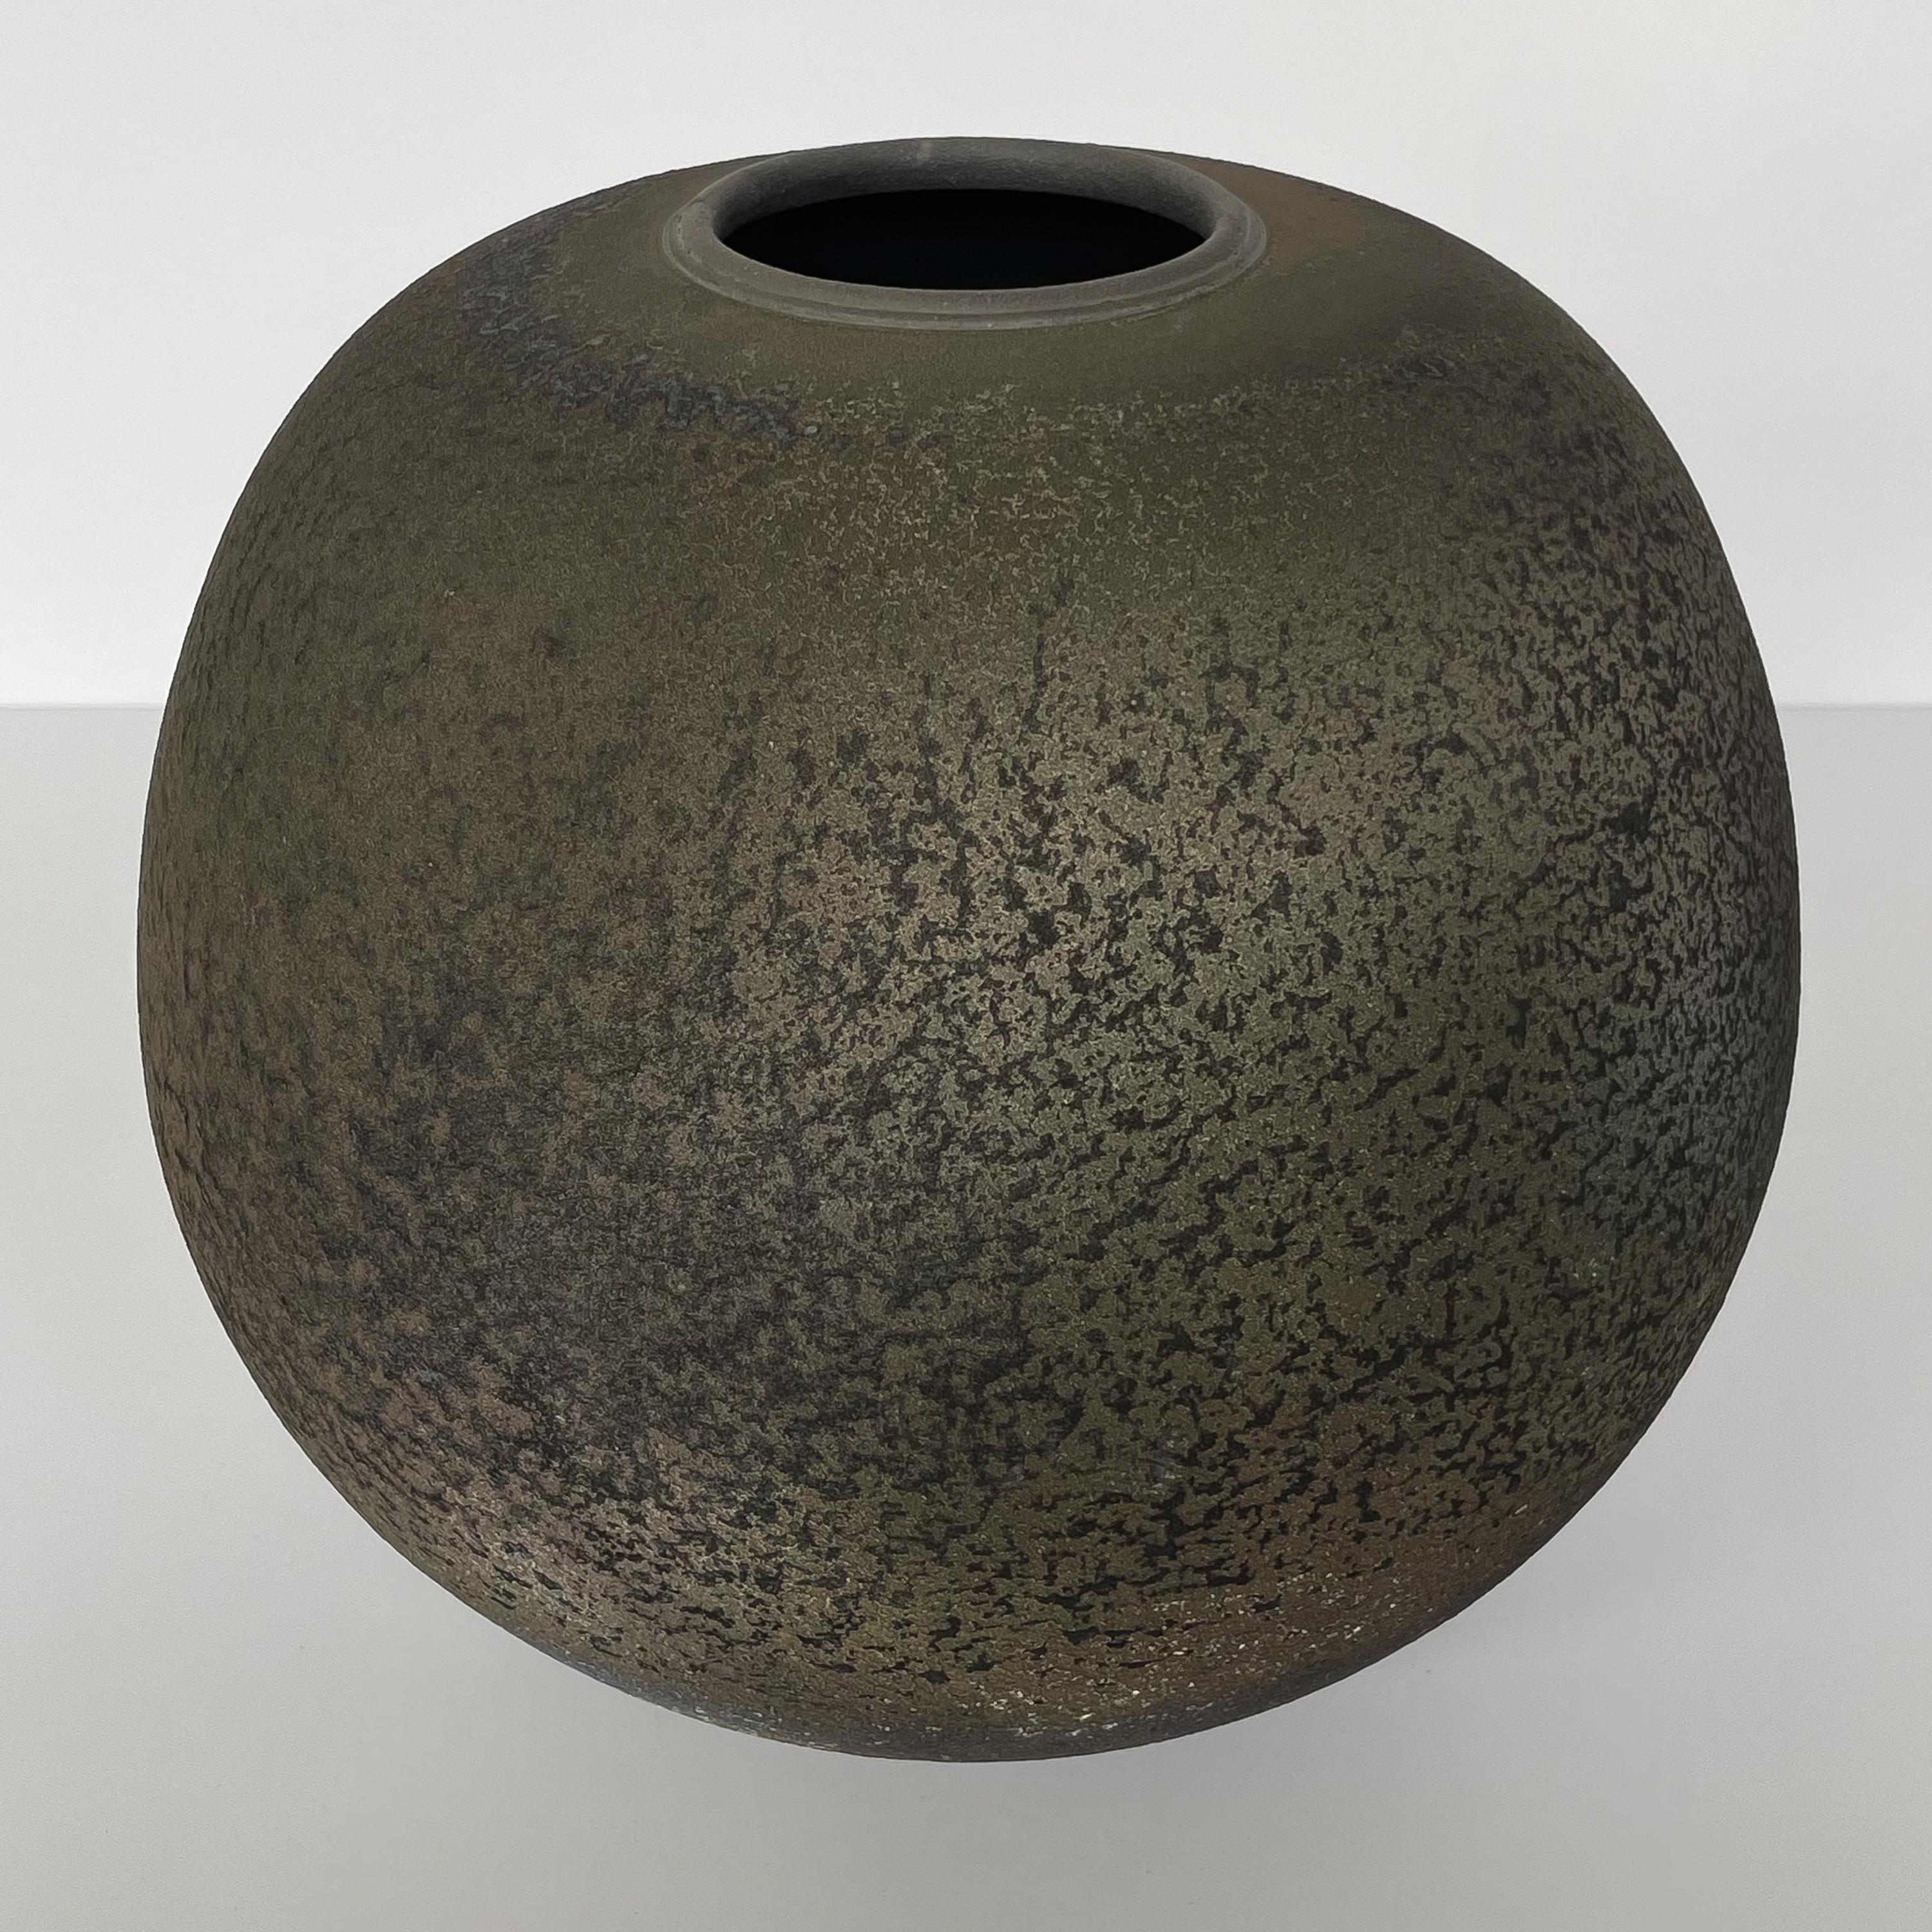 Raku fired stoneware vessel by Harvey Sadow (American, b. 1946), circa 1984. This hand thrown ceramic vase features a textural glaze in bronze, gray, rust and earthtones. Inscribed H. Sadow, Maryland 1984. Measures: 11